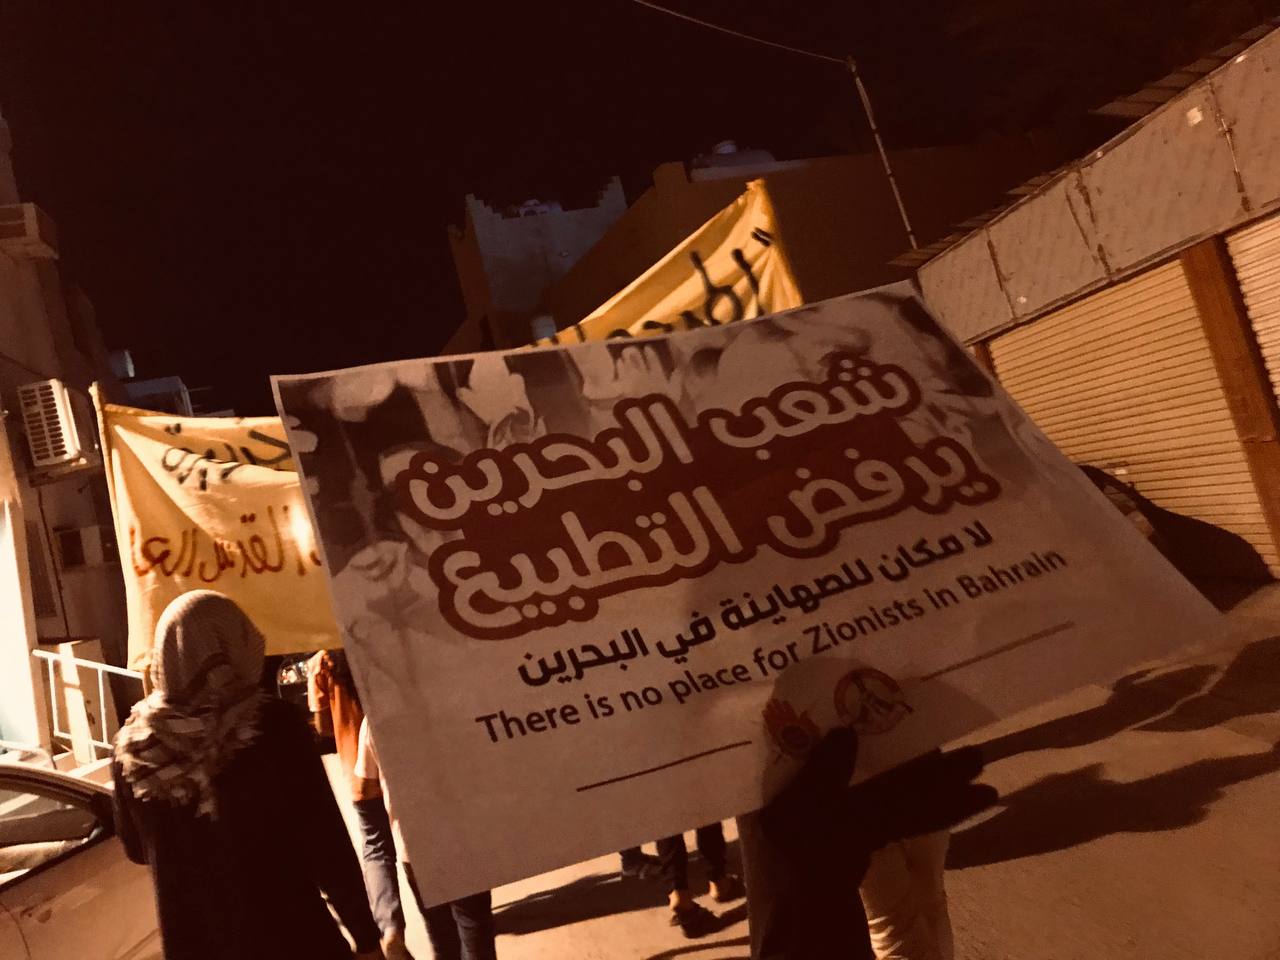 Statement: Greetings to the Bahrainis Who stressed on the “International Quds Day” That They Are Resisting Normalization